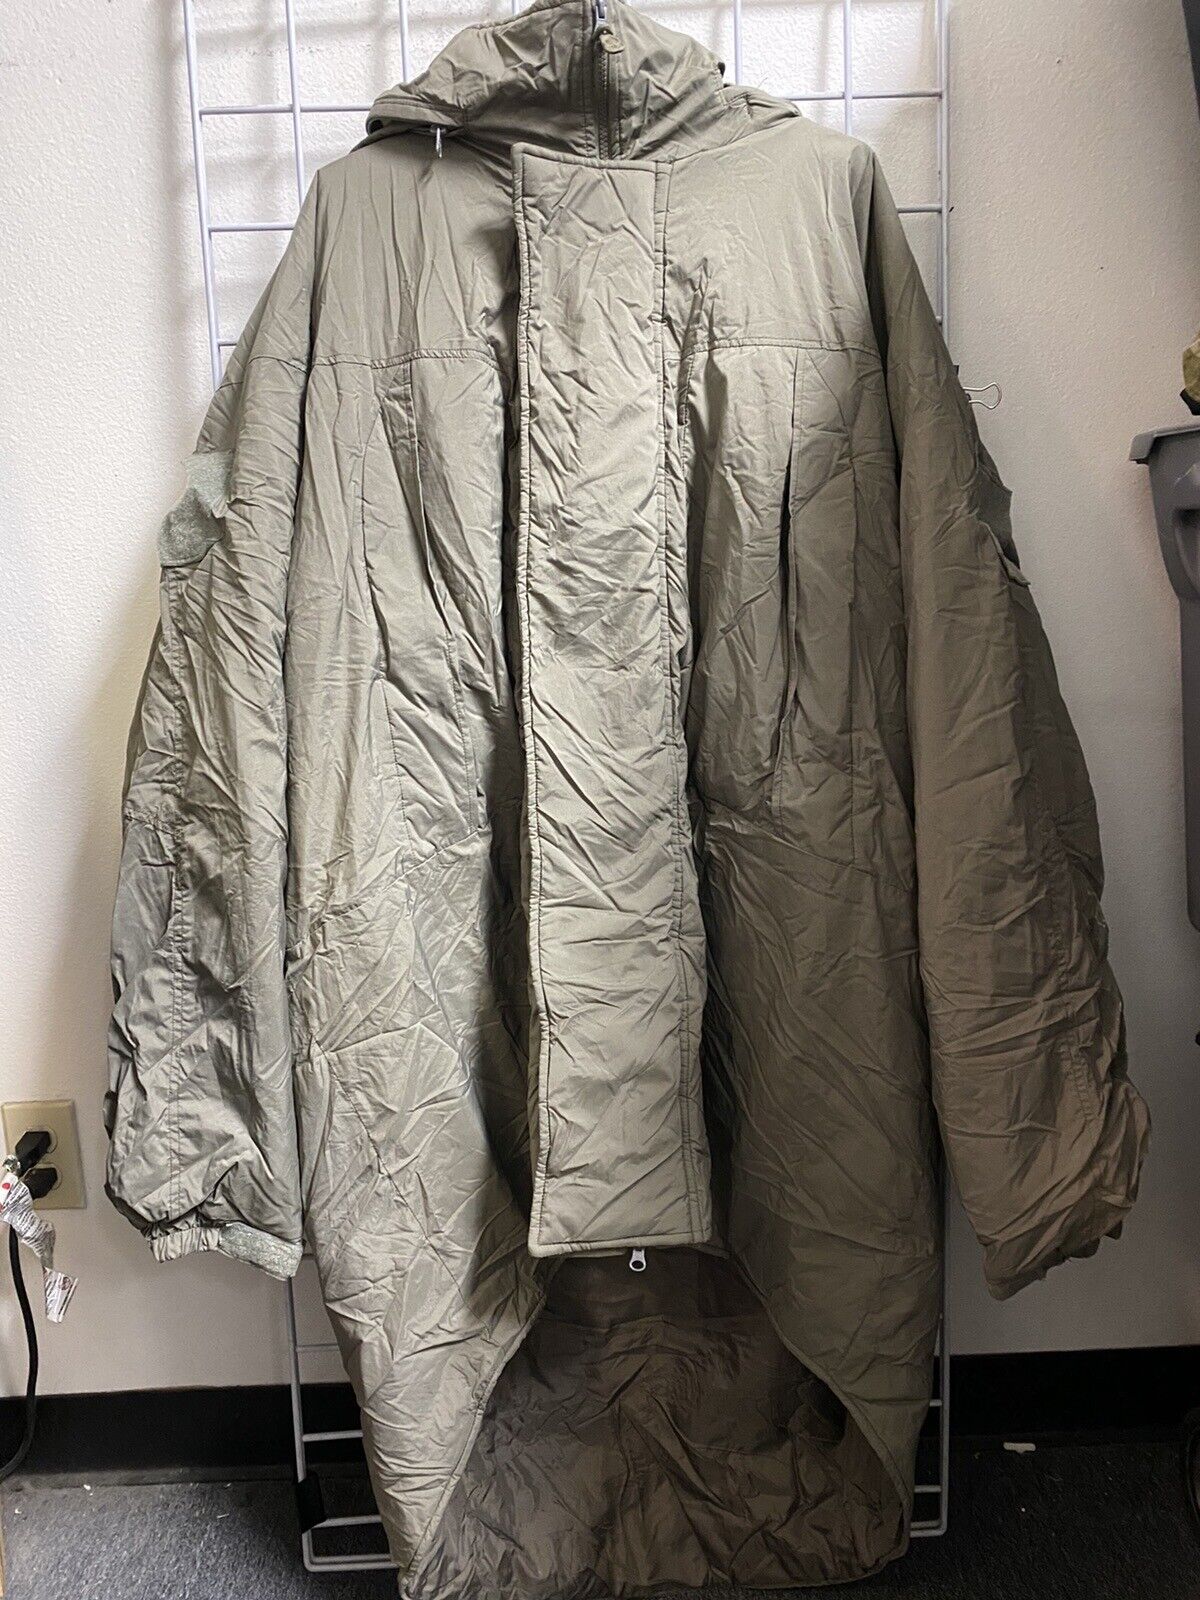 HALYS GEAR PCU JACKET LVL 7 (X-LARGE) NEW WITHOUT TAGS